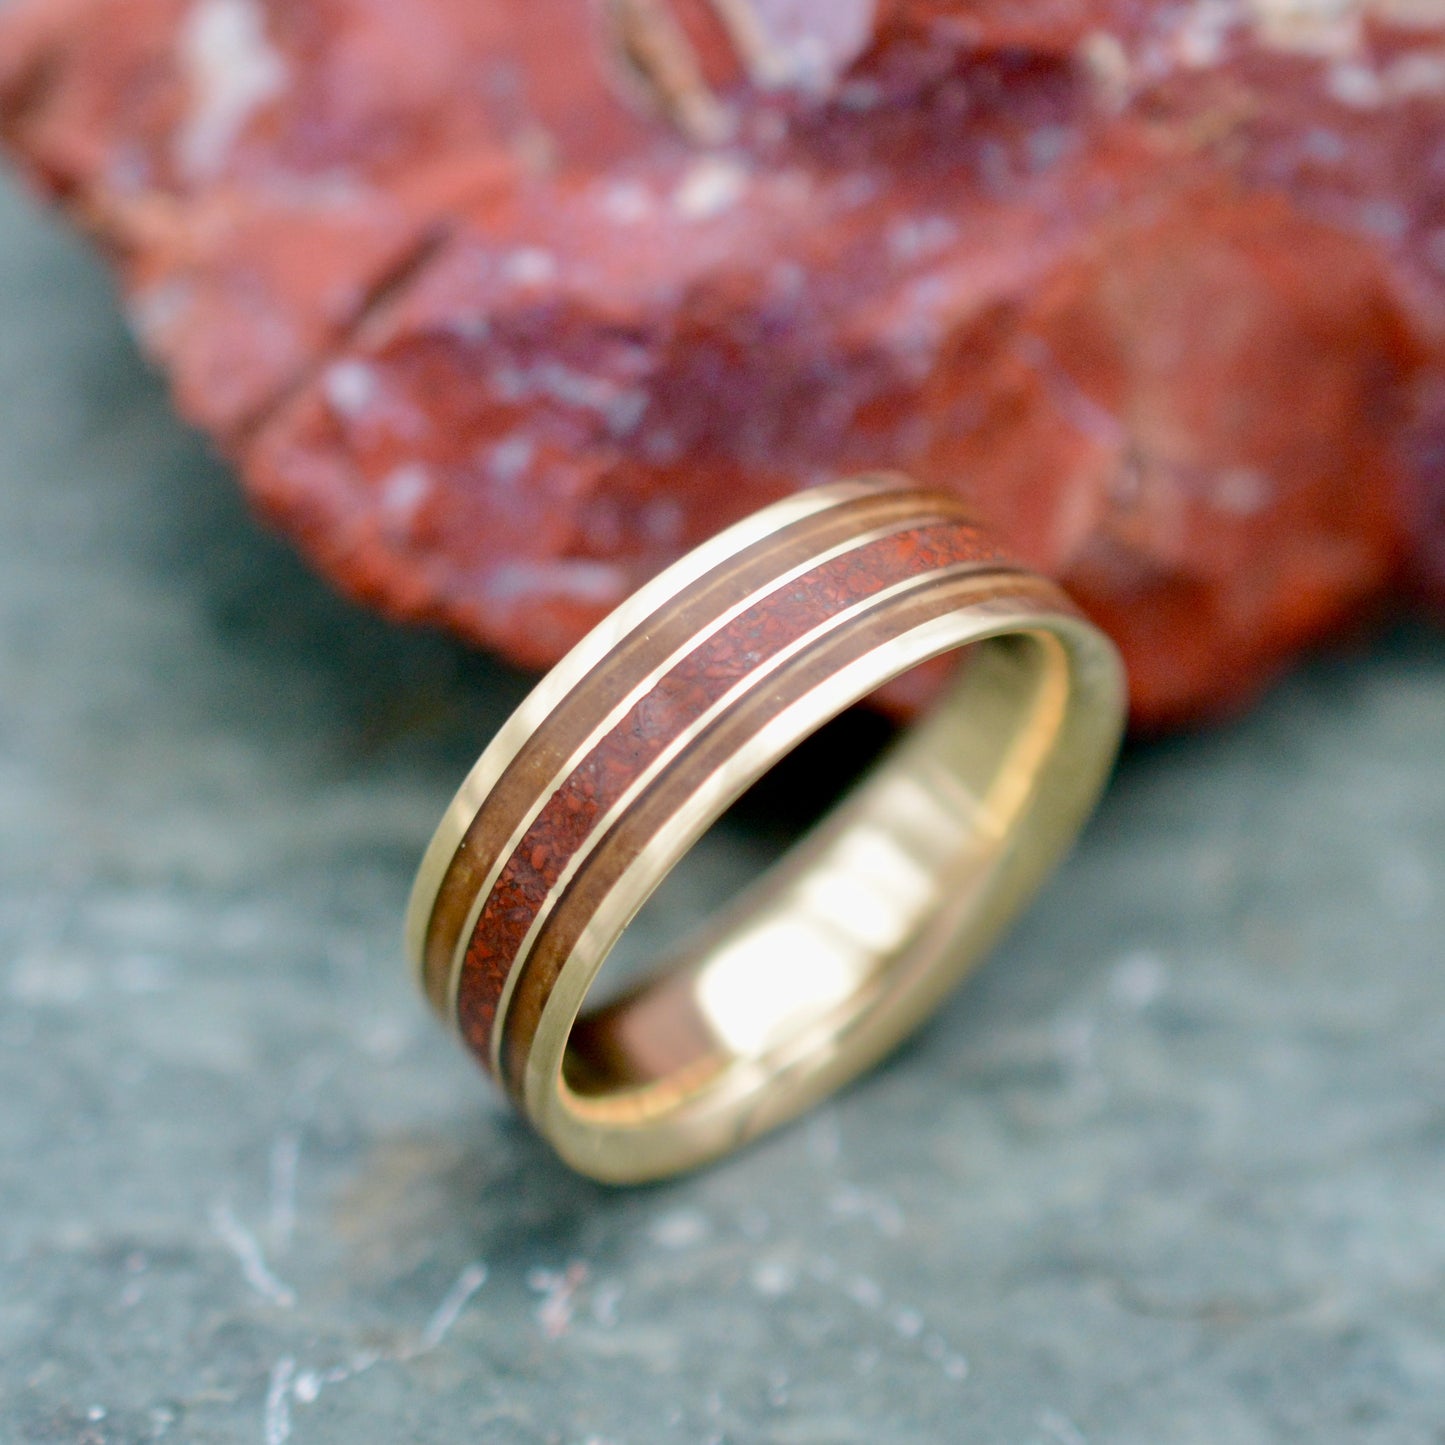 a gold wedding band with a wood inlay